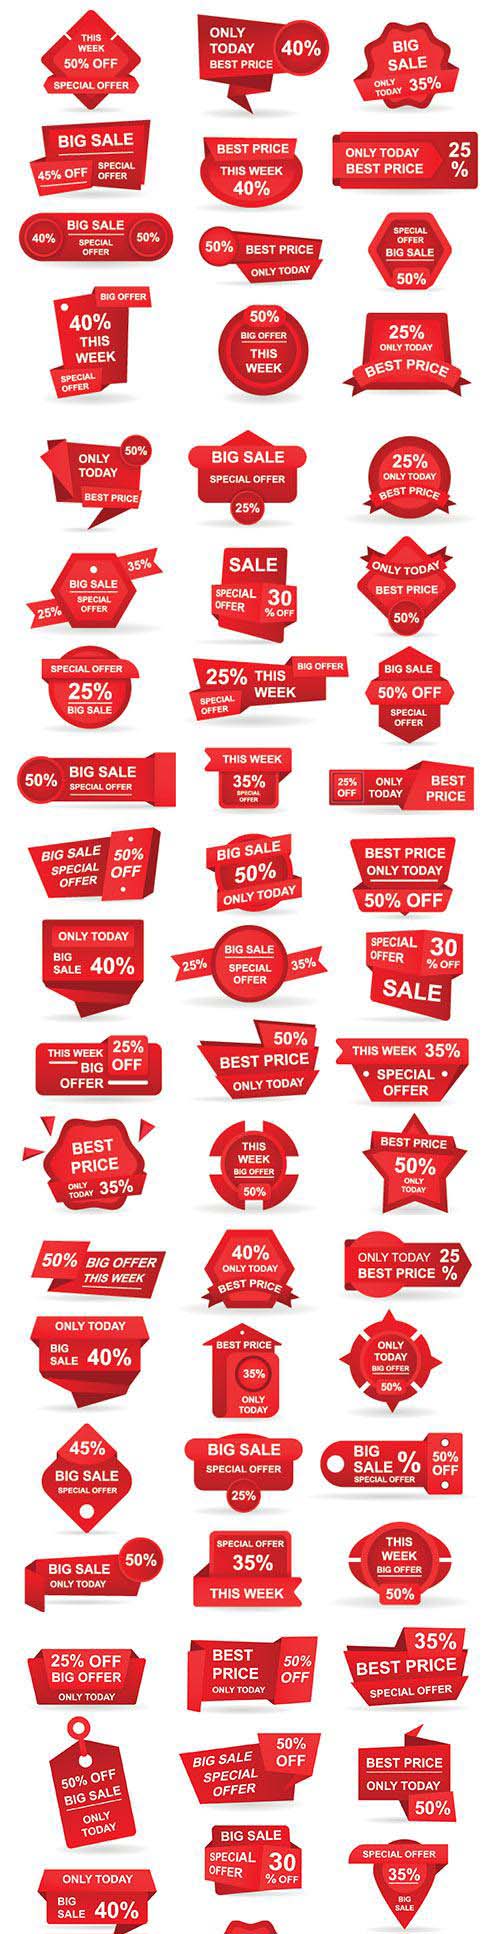 Stickers best offer price and big sale pricing